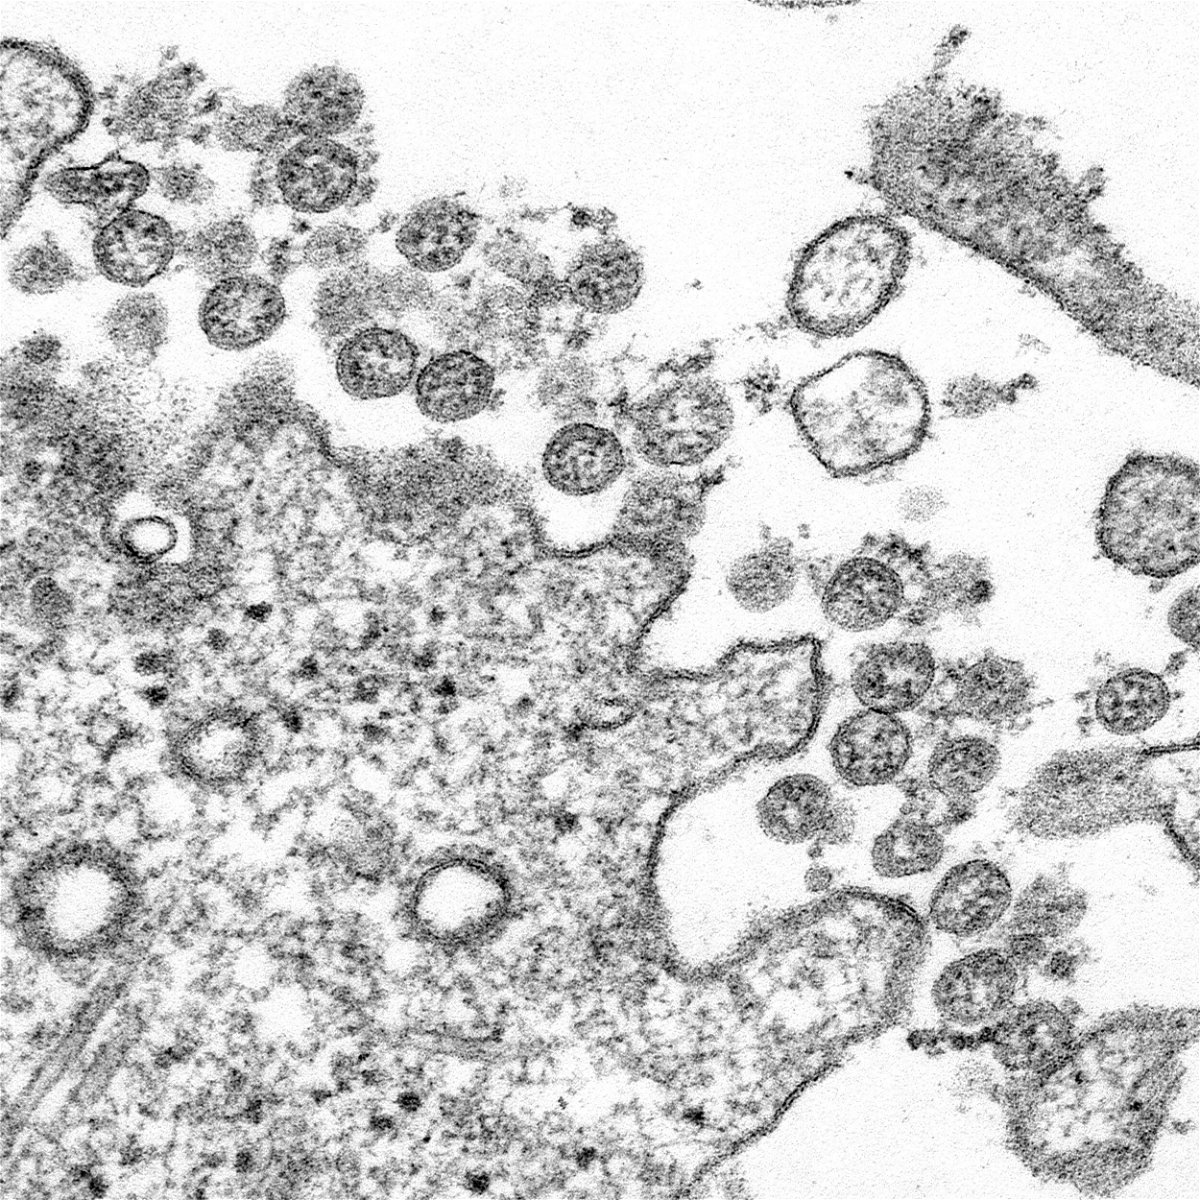 <i>CDC</i><br/>Transmission electron microscopic image of an isolate from the first U.S. case of Covid-19